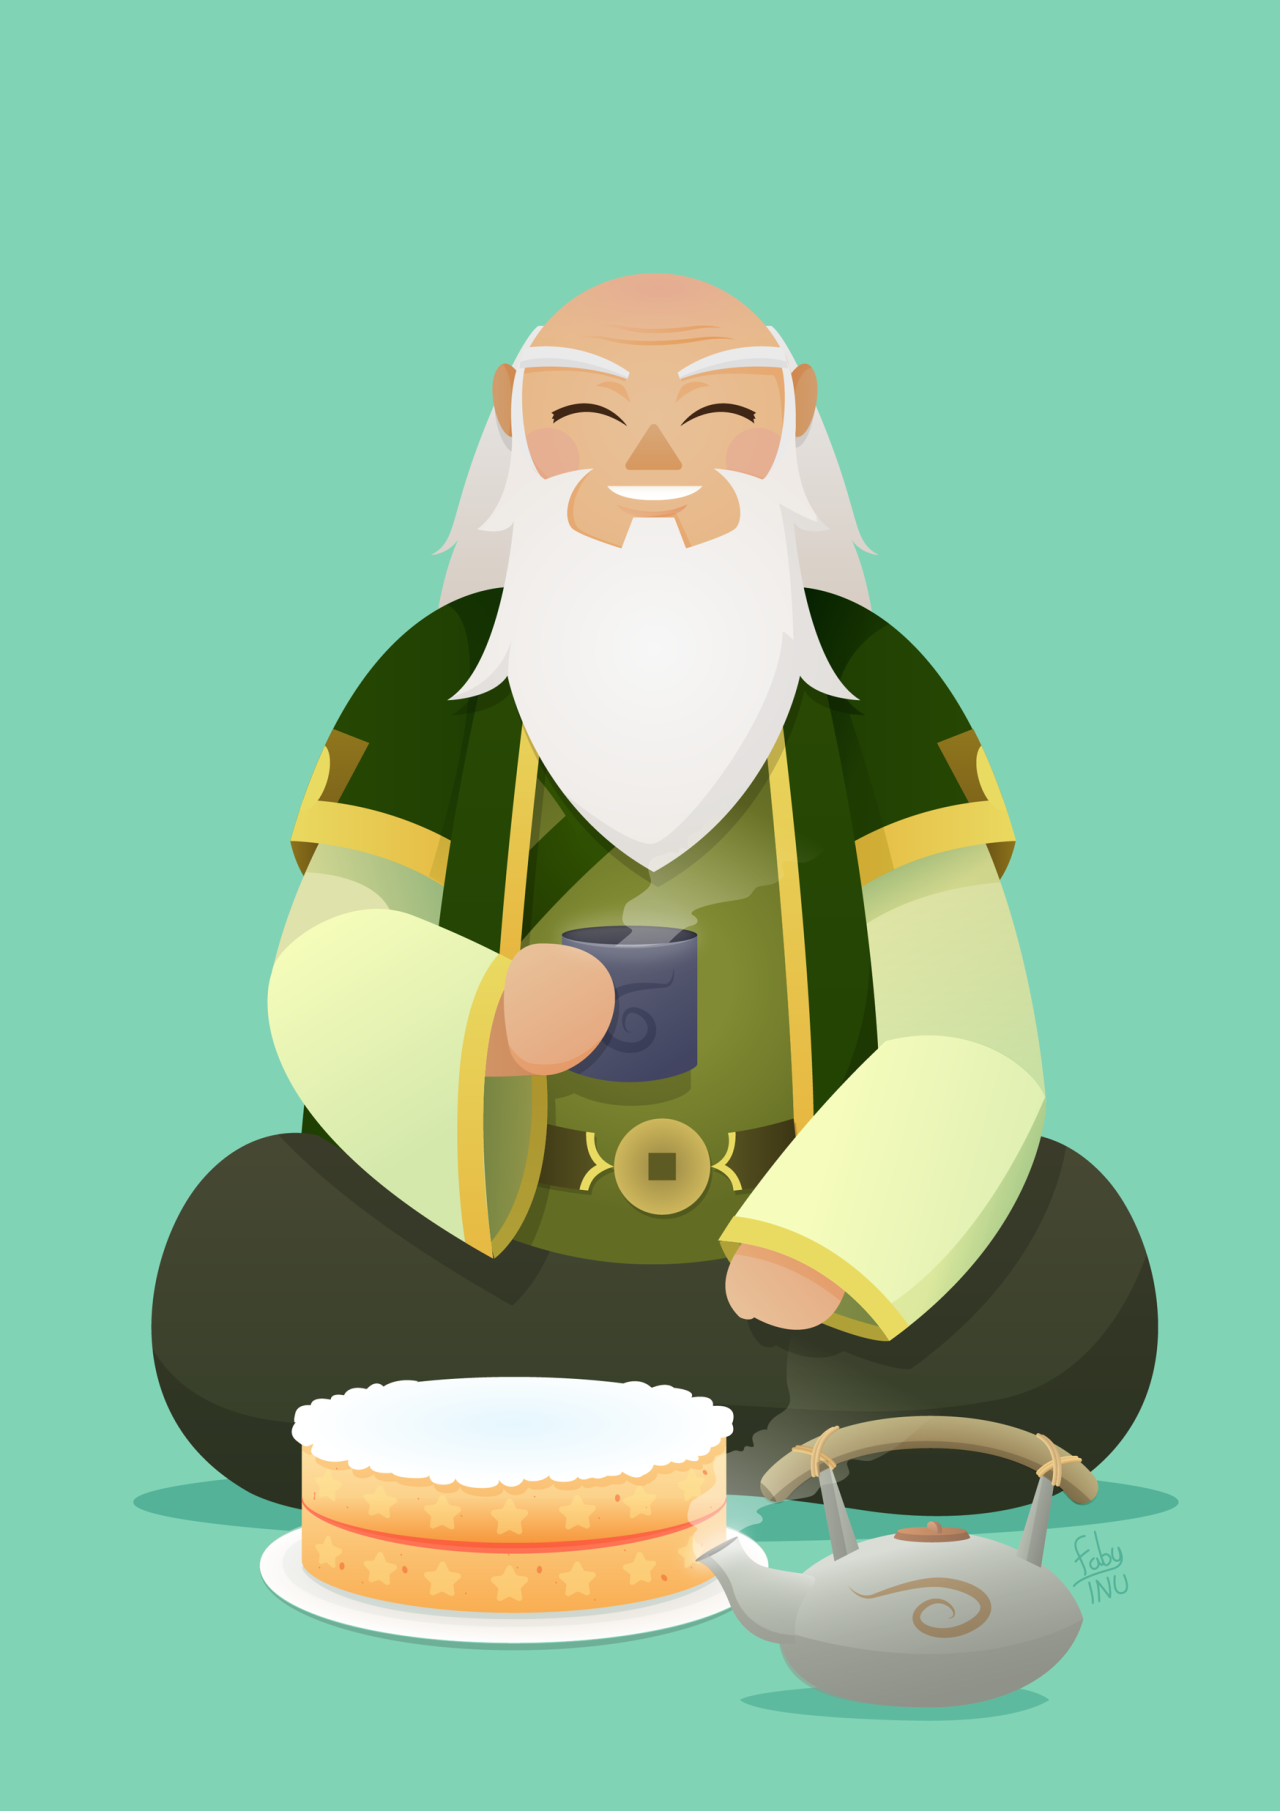 Uncle Iroh 2020. Avatar airbender, Avatar the last